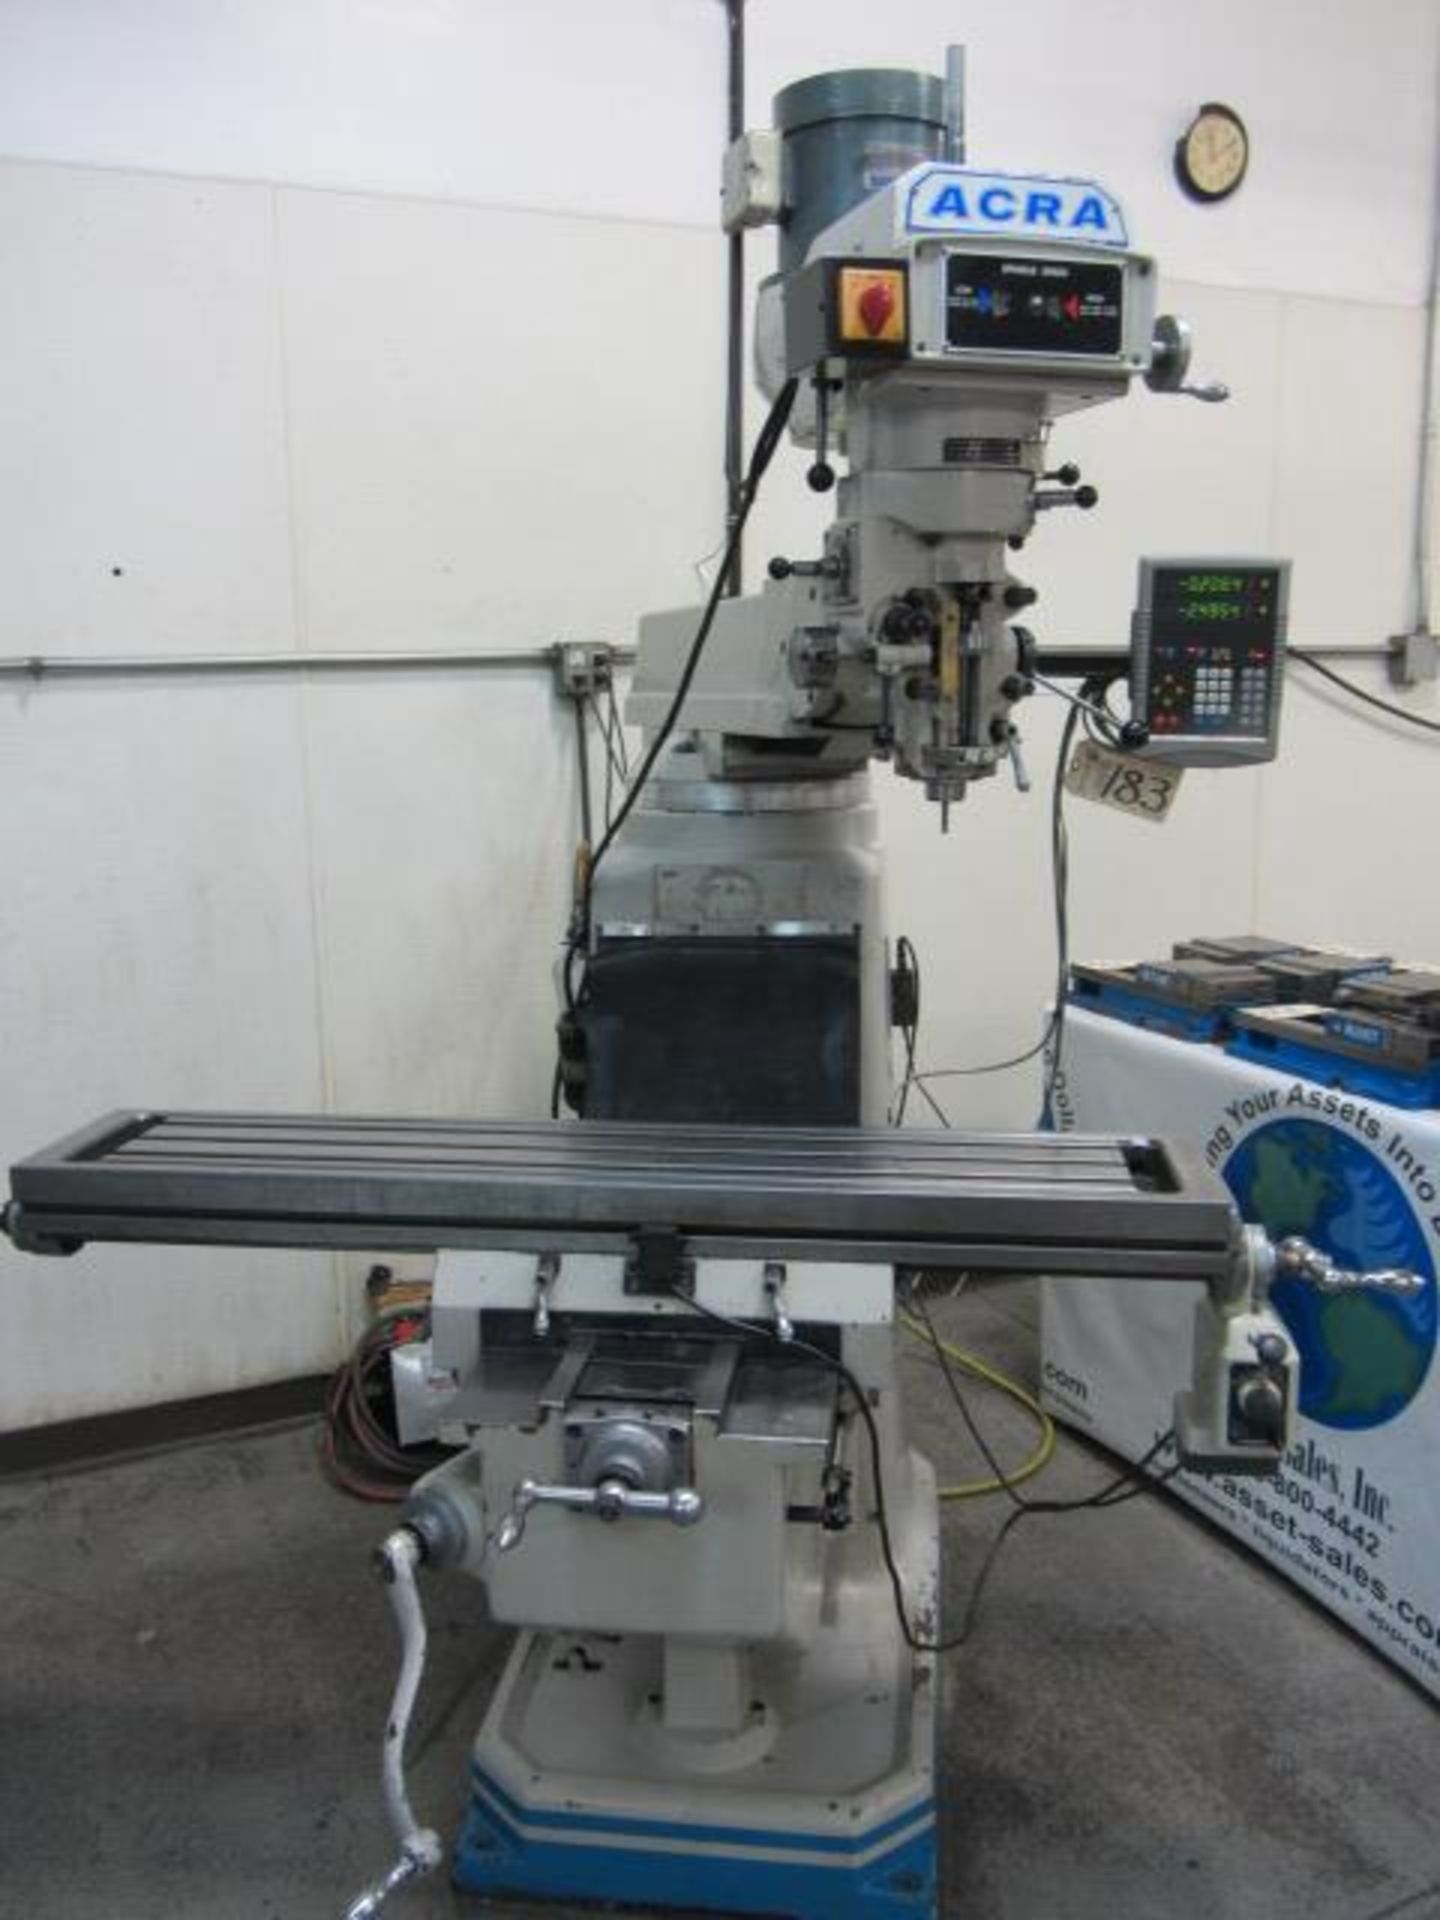 Acra Model AM-3V Variable Speed Vertical Milling Machine with 10'' x 54'' Power Feed Table, R-8 - Image 4 of 9